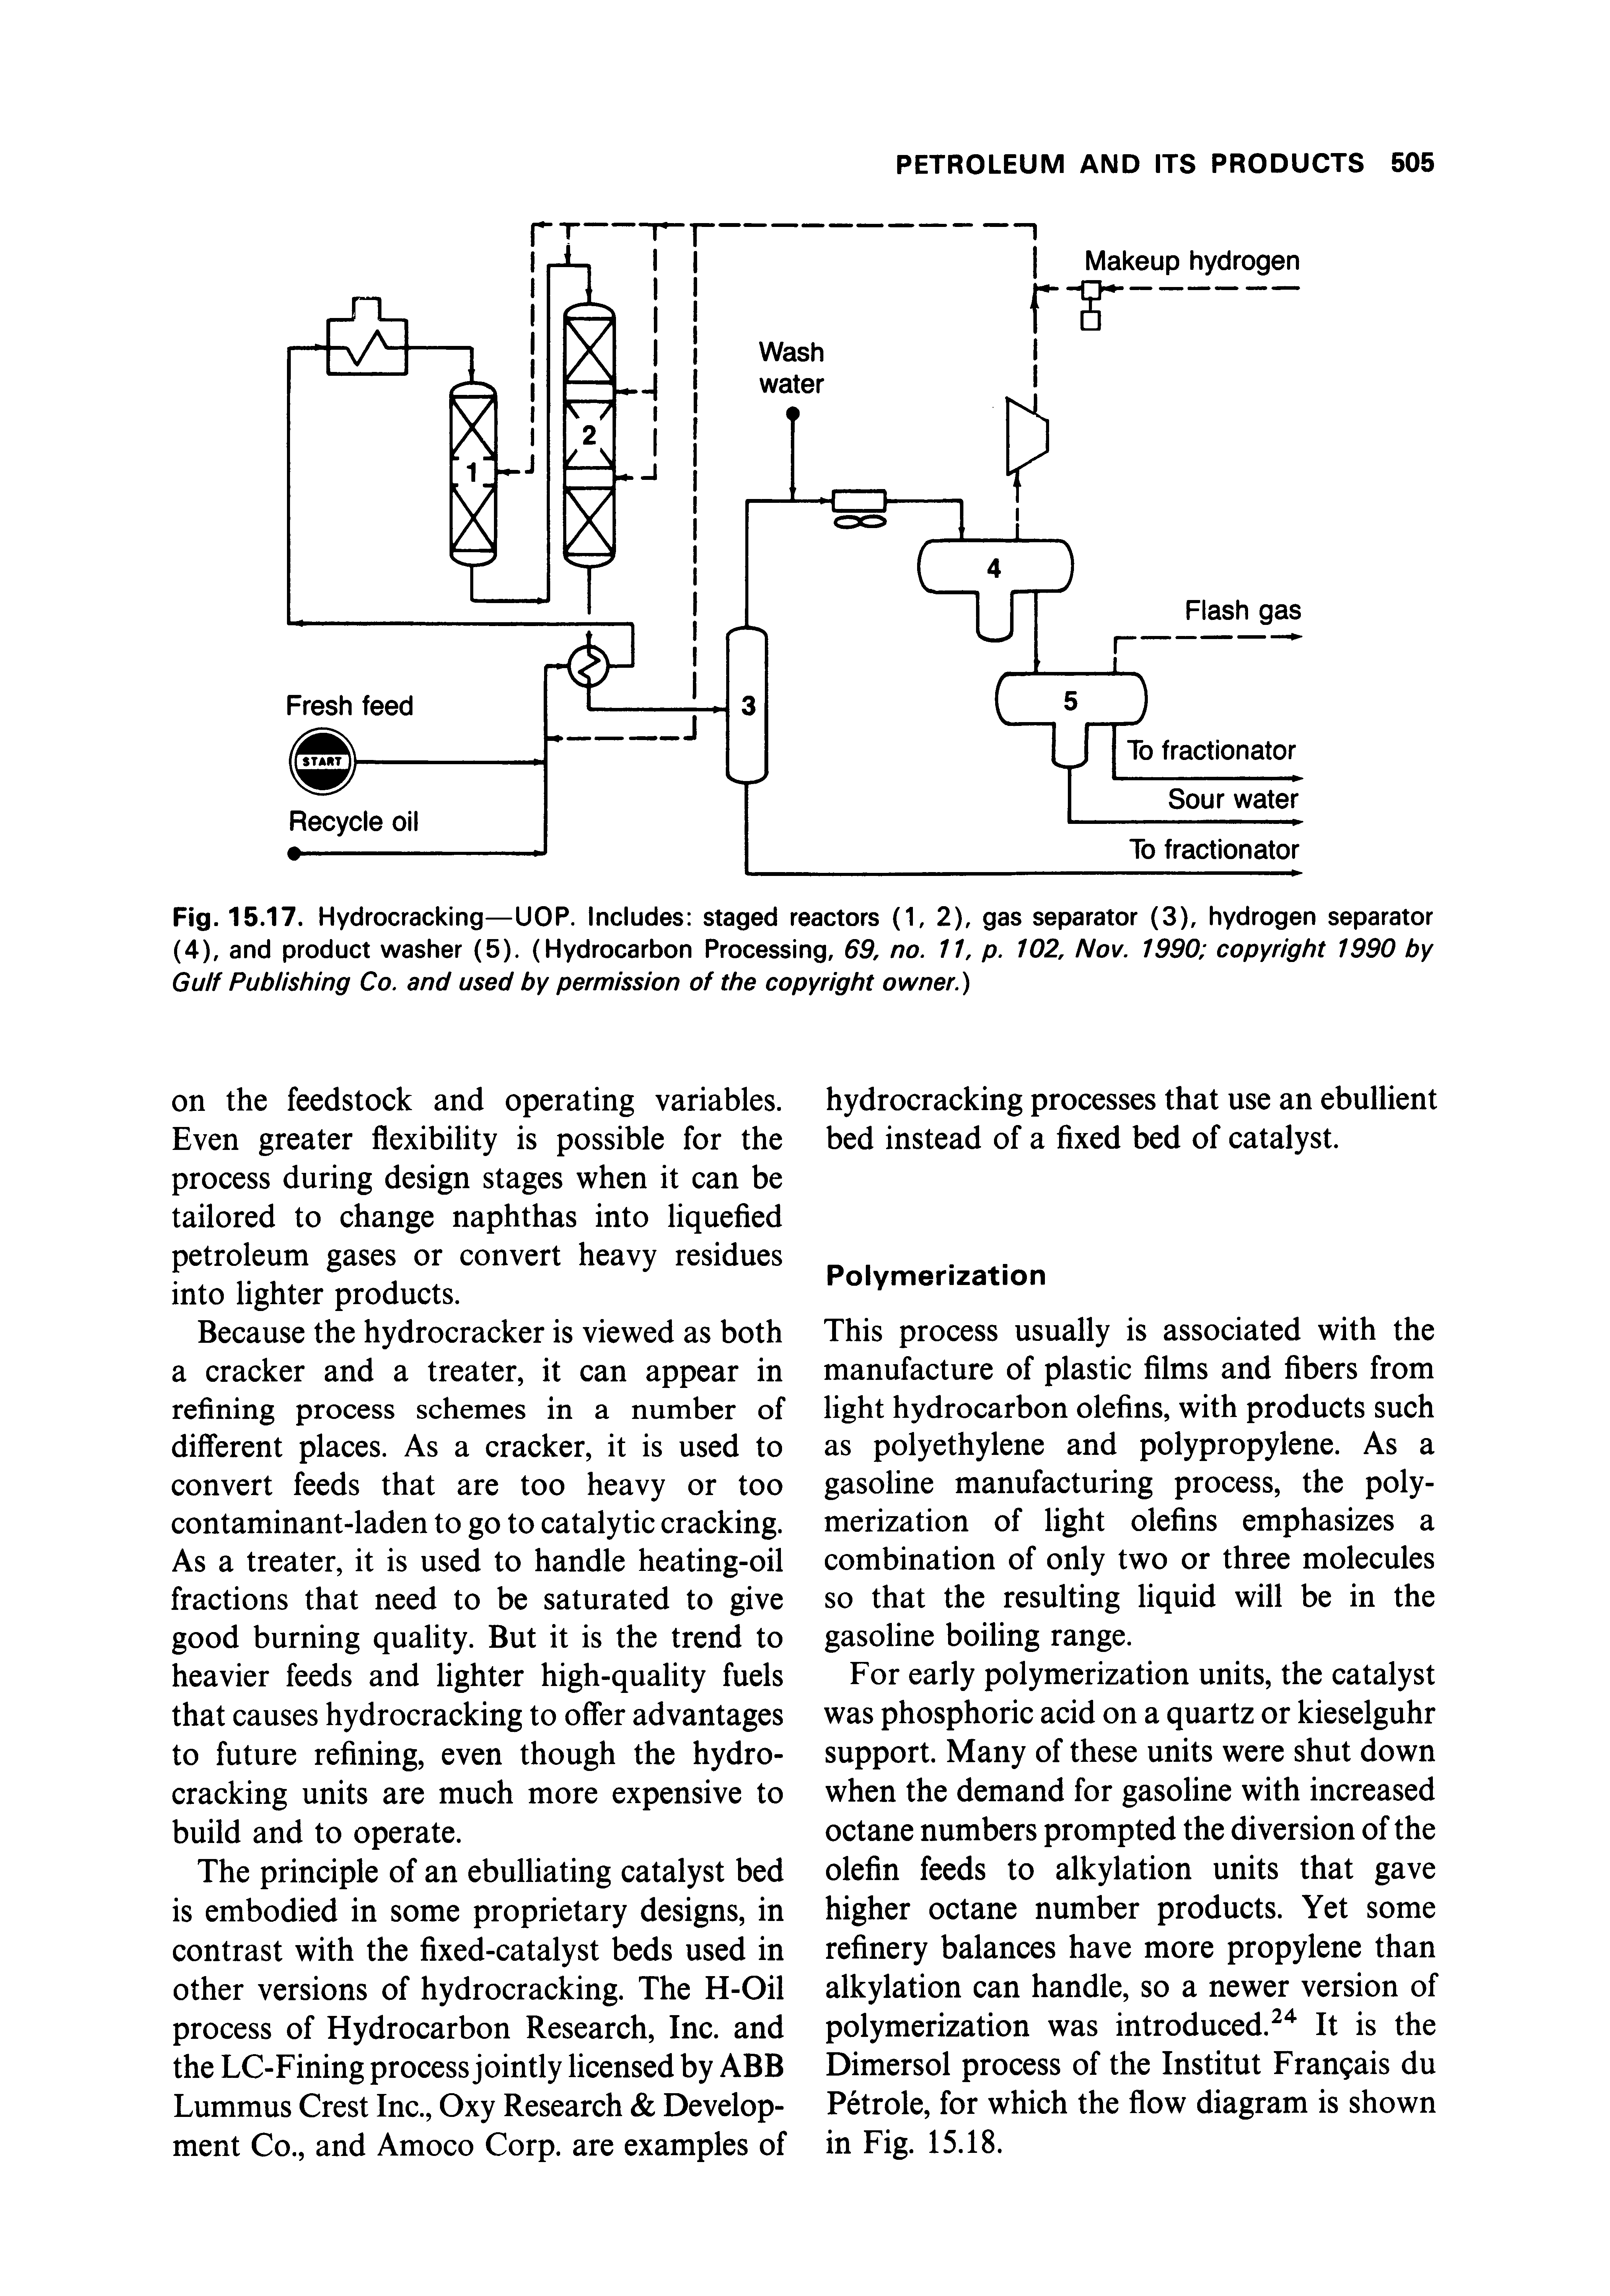 Fig. 15.17. Hydrocracking—UOP. Includes staged reactors (1, 2), gas separator (3), hydrogen separator (4), and product washer (5). (Hydrocarbon Processing, 69, no. 11, p. 102, Nov. 1990 copyright 1990 by Gulf Publishing Co. and used by permission of the copyright owner.)...